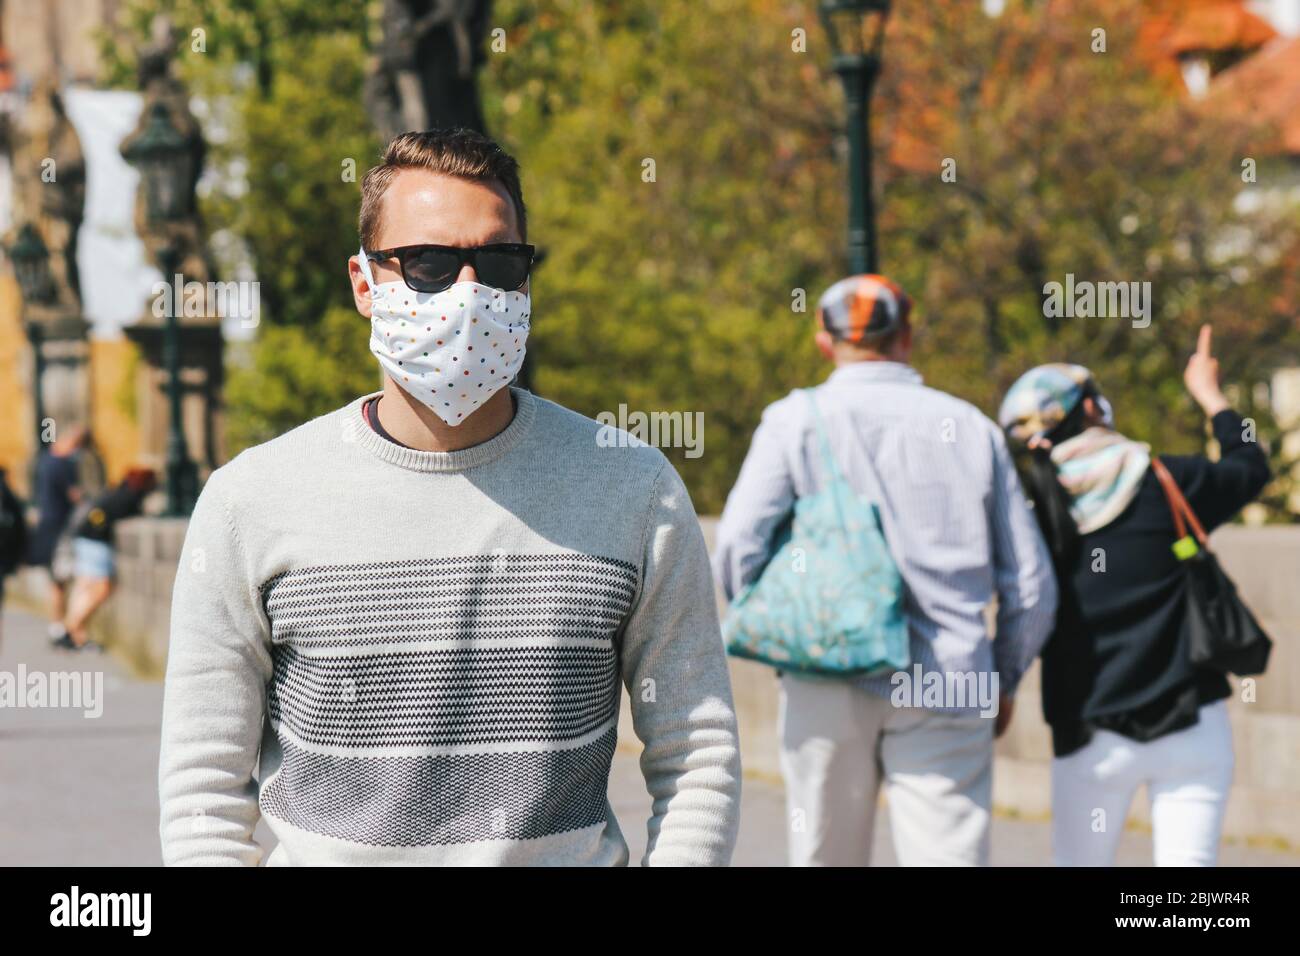 Young man with sunglasses and sewed fabric face mask photographed on the Charles Bridge in Prague, Czech Republic. Blurred people in the background. Travelling, tourism during coronavirus. COVID-19. Stock Photo